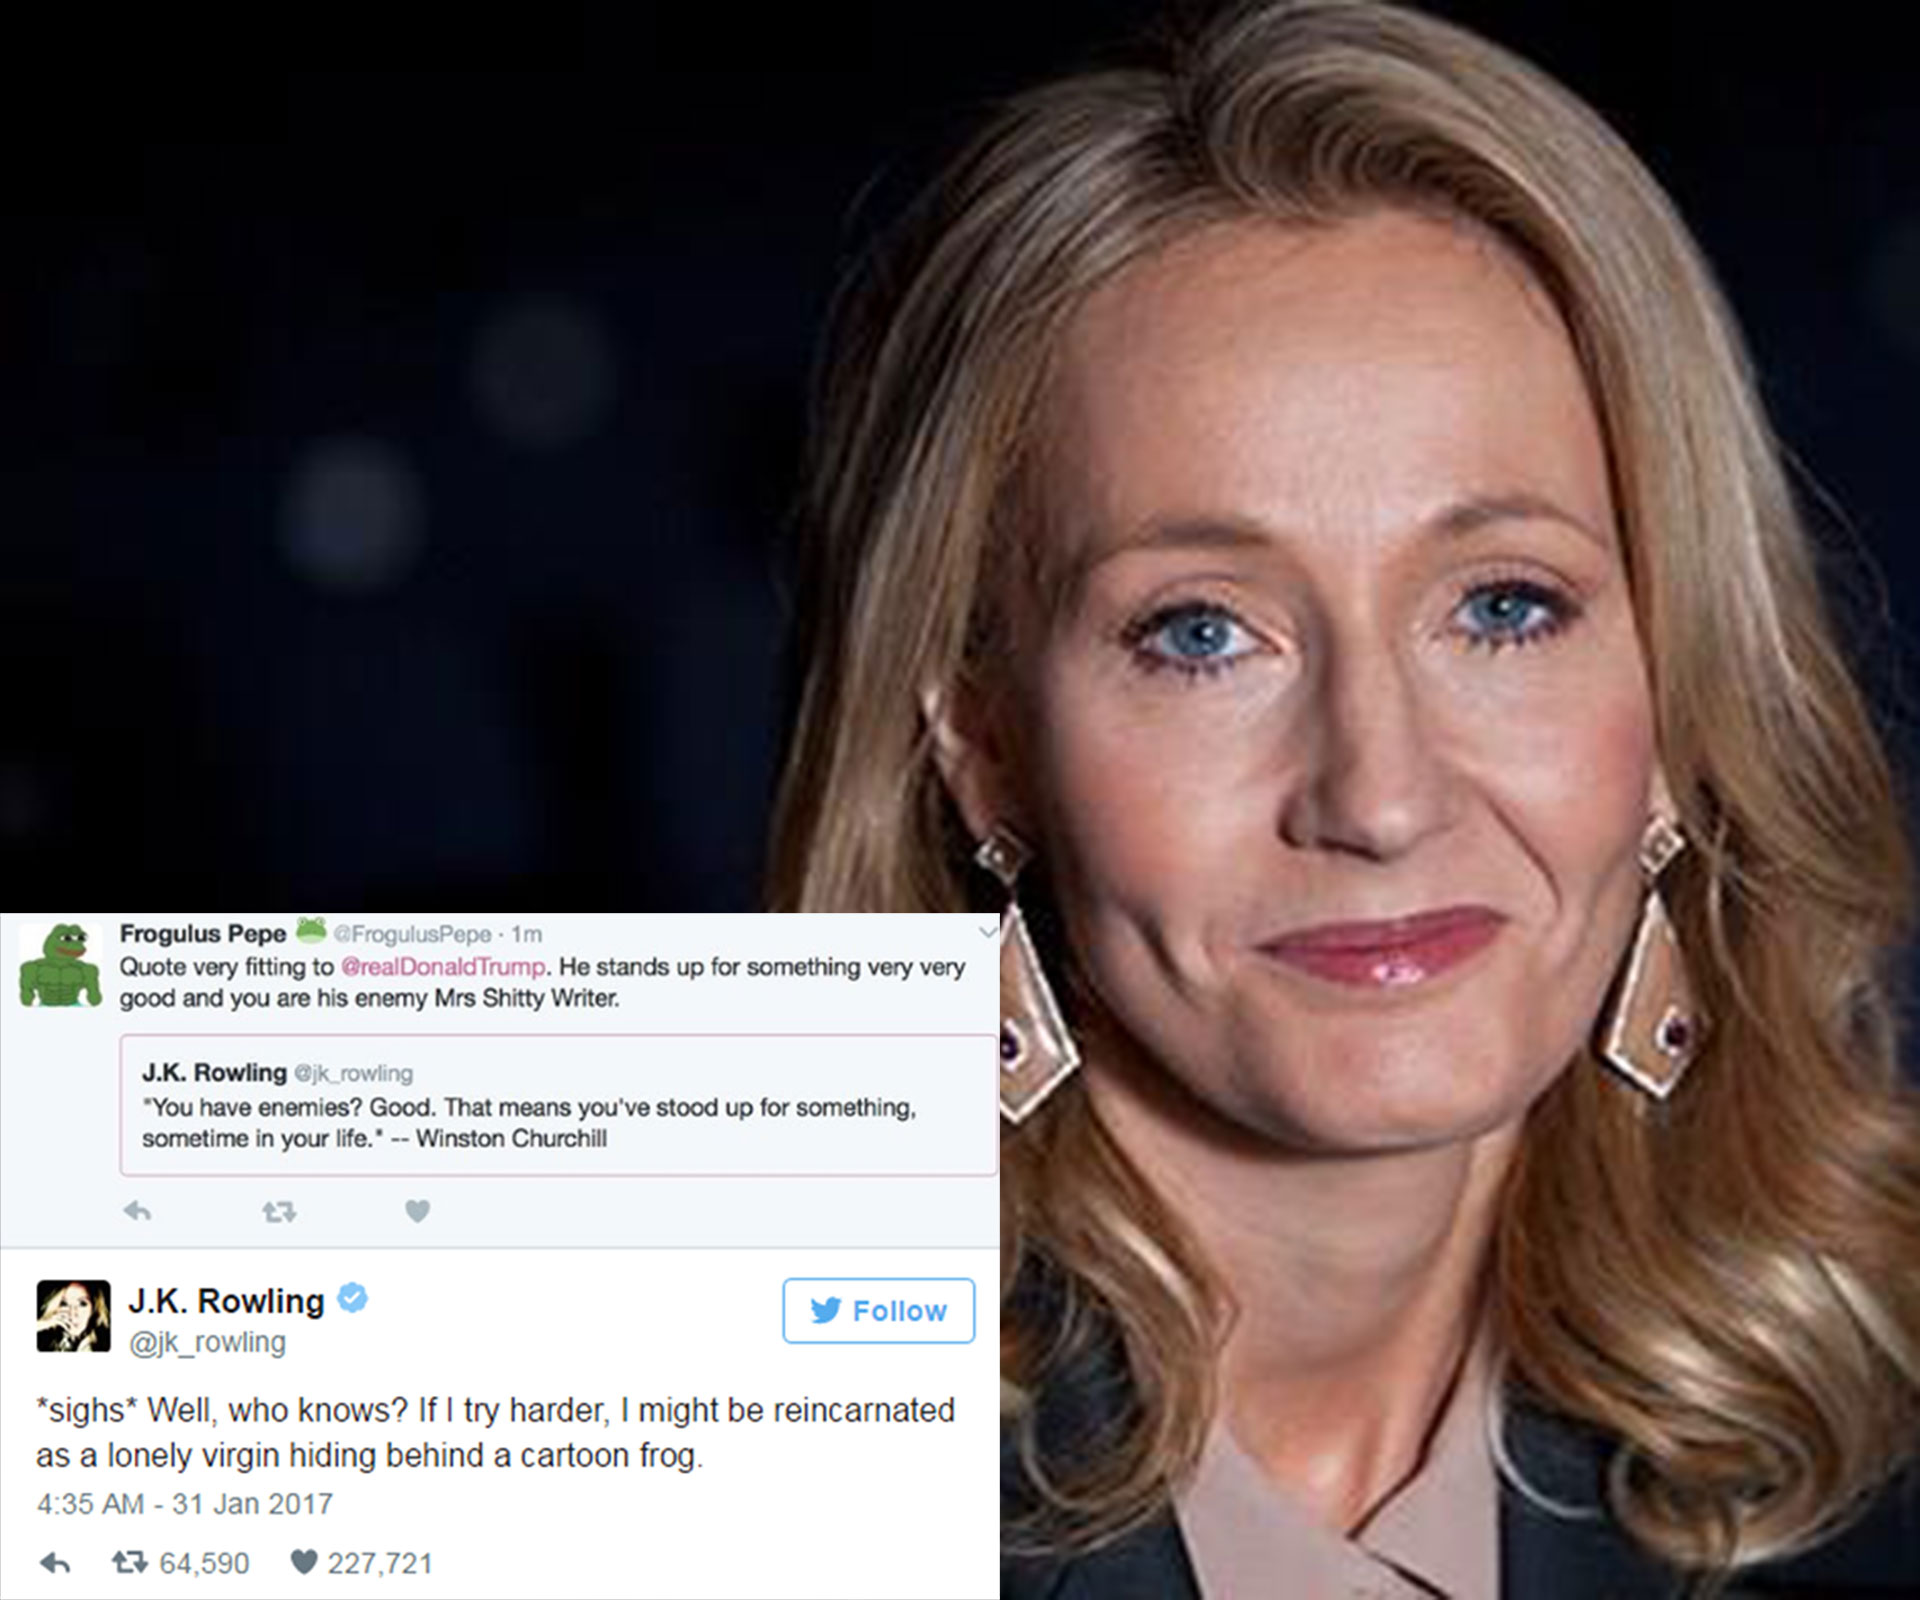 J.K. Rowling’s been shutting down Twitter trolls left, right and centre